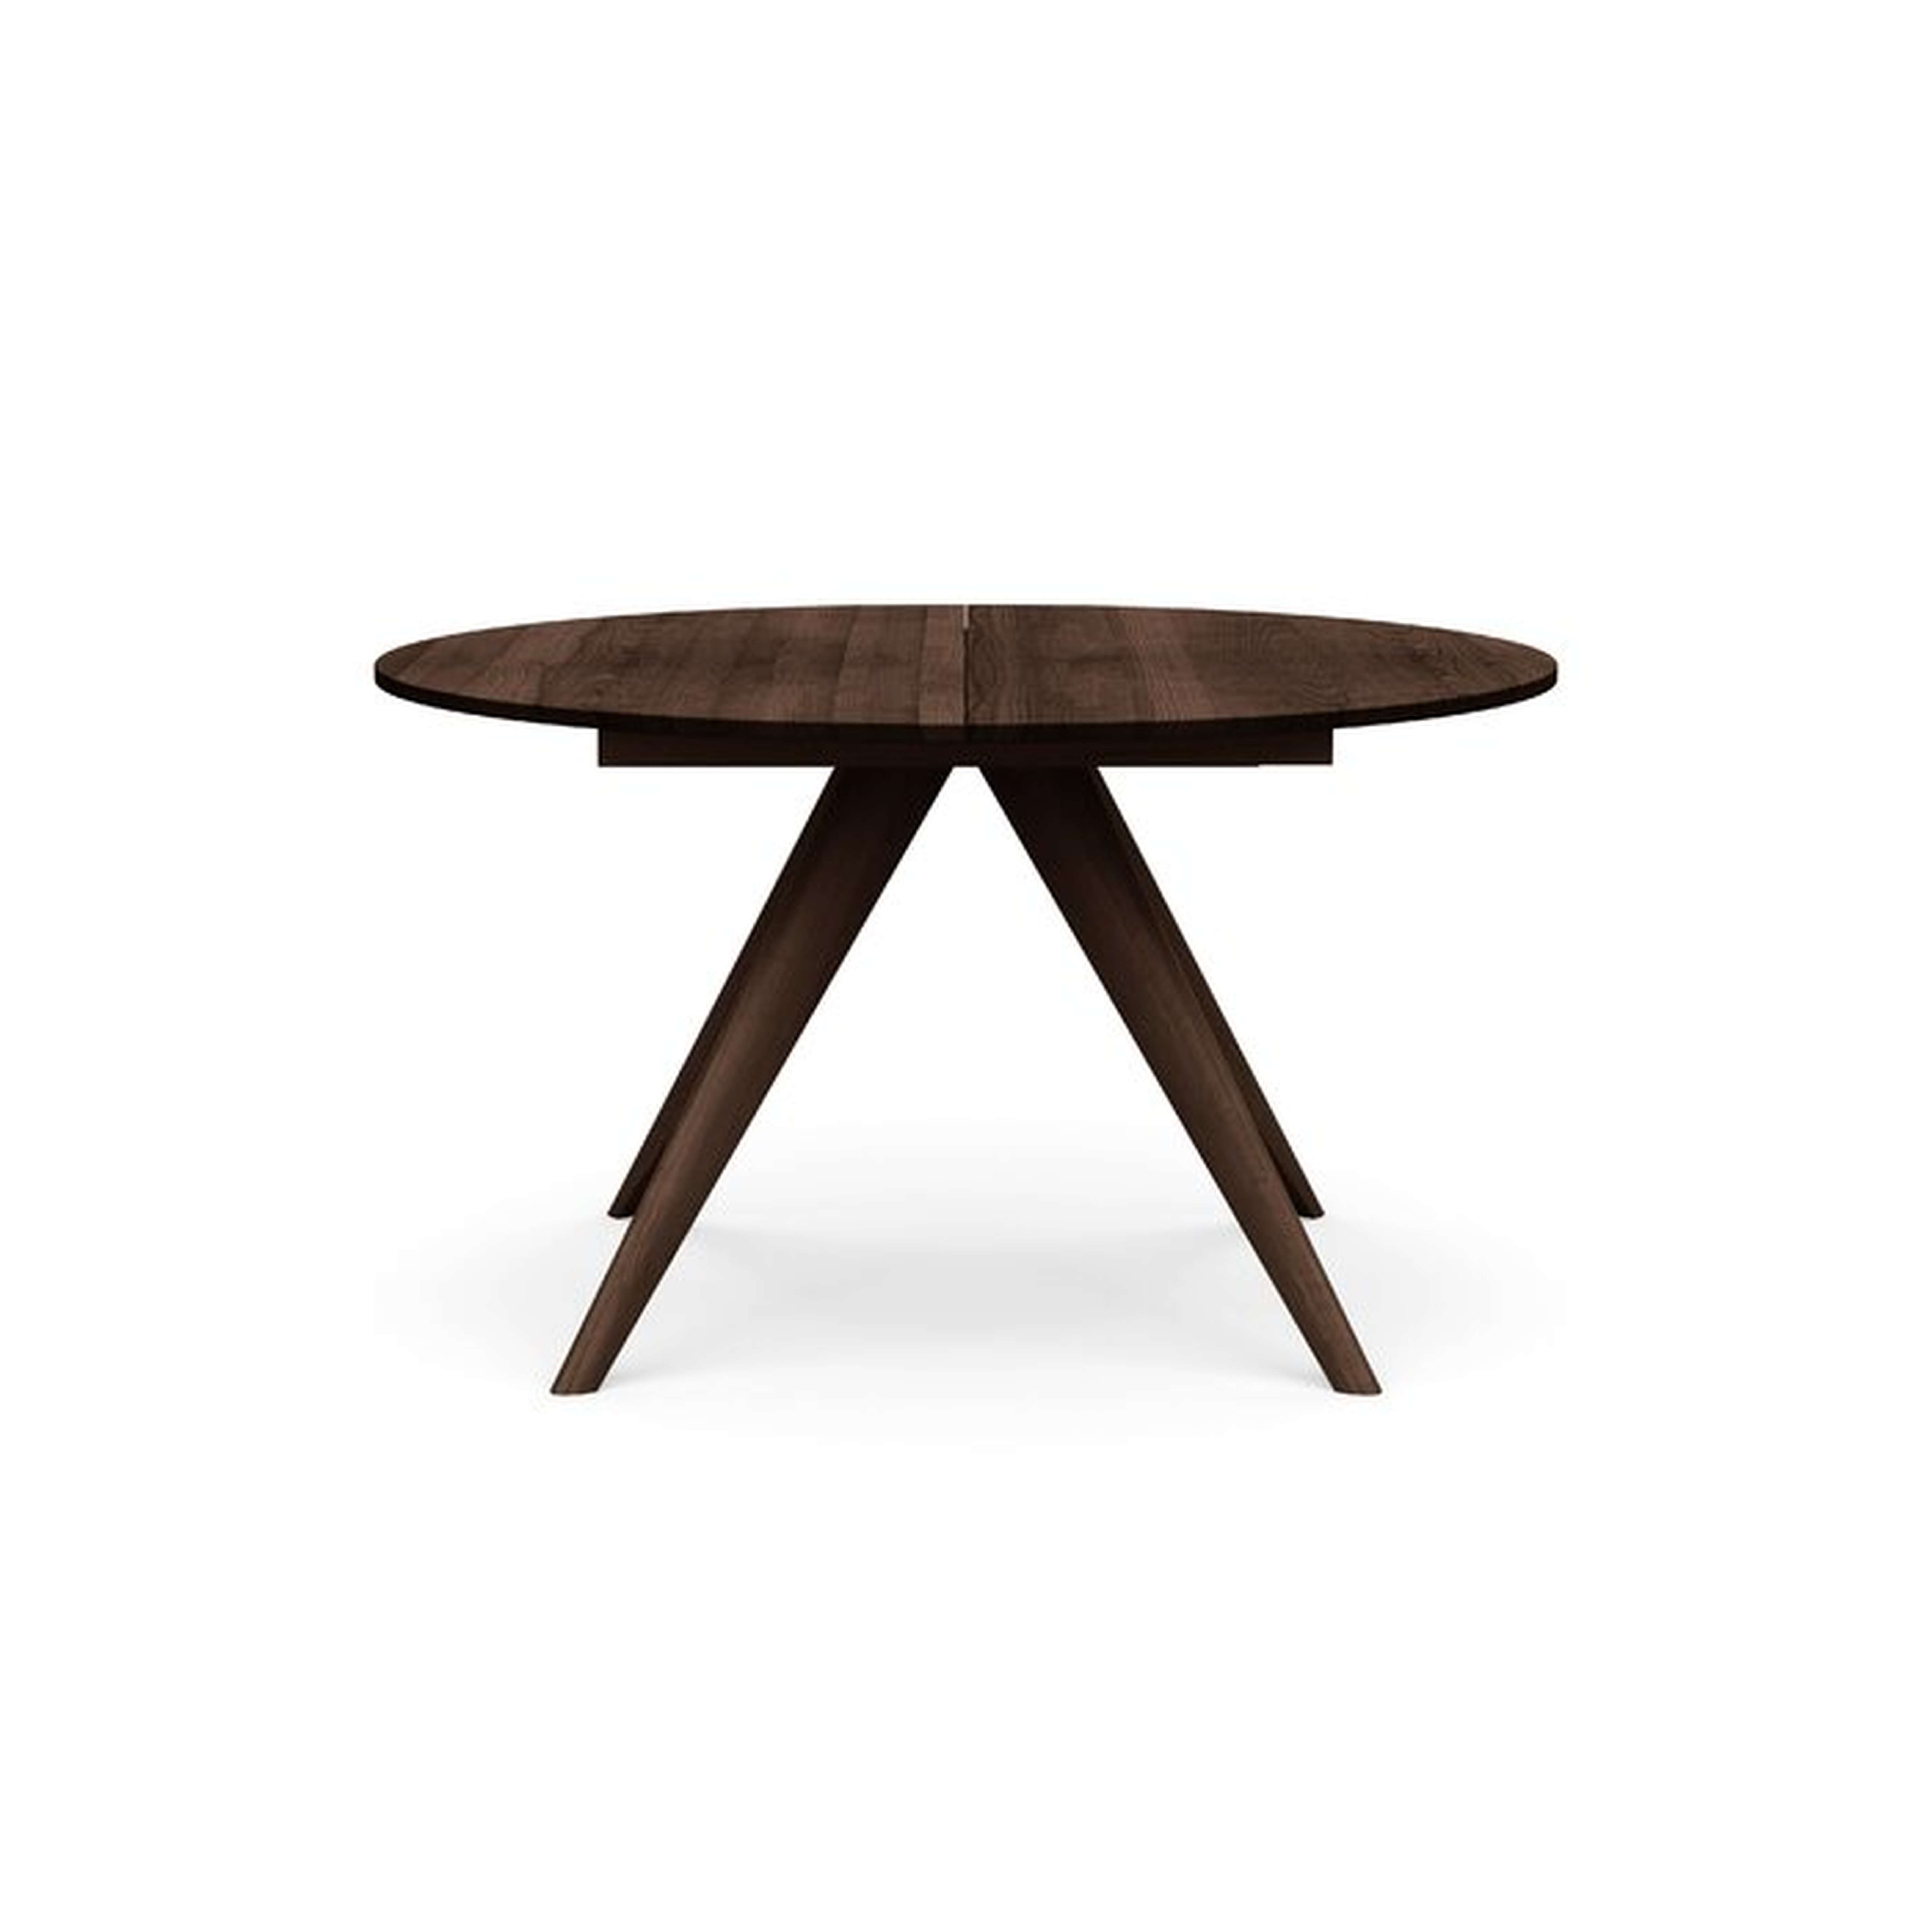 Copeland Furniture Catalina Extendable Dining Table Color: Smoke Cherry, Size: 30" H x 54" W x 54" D - Wayfair